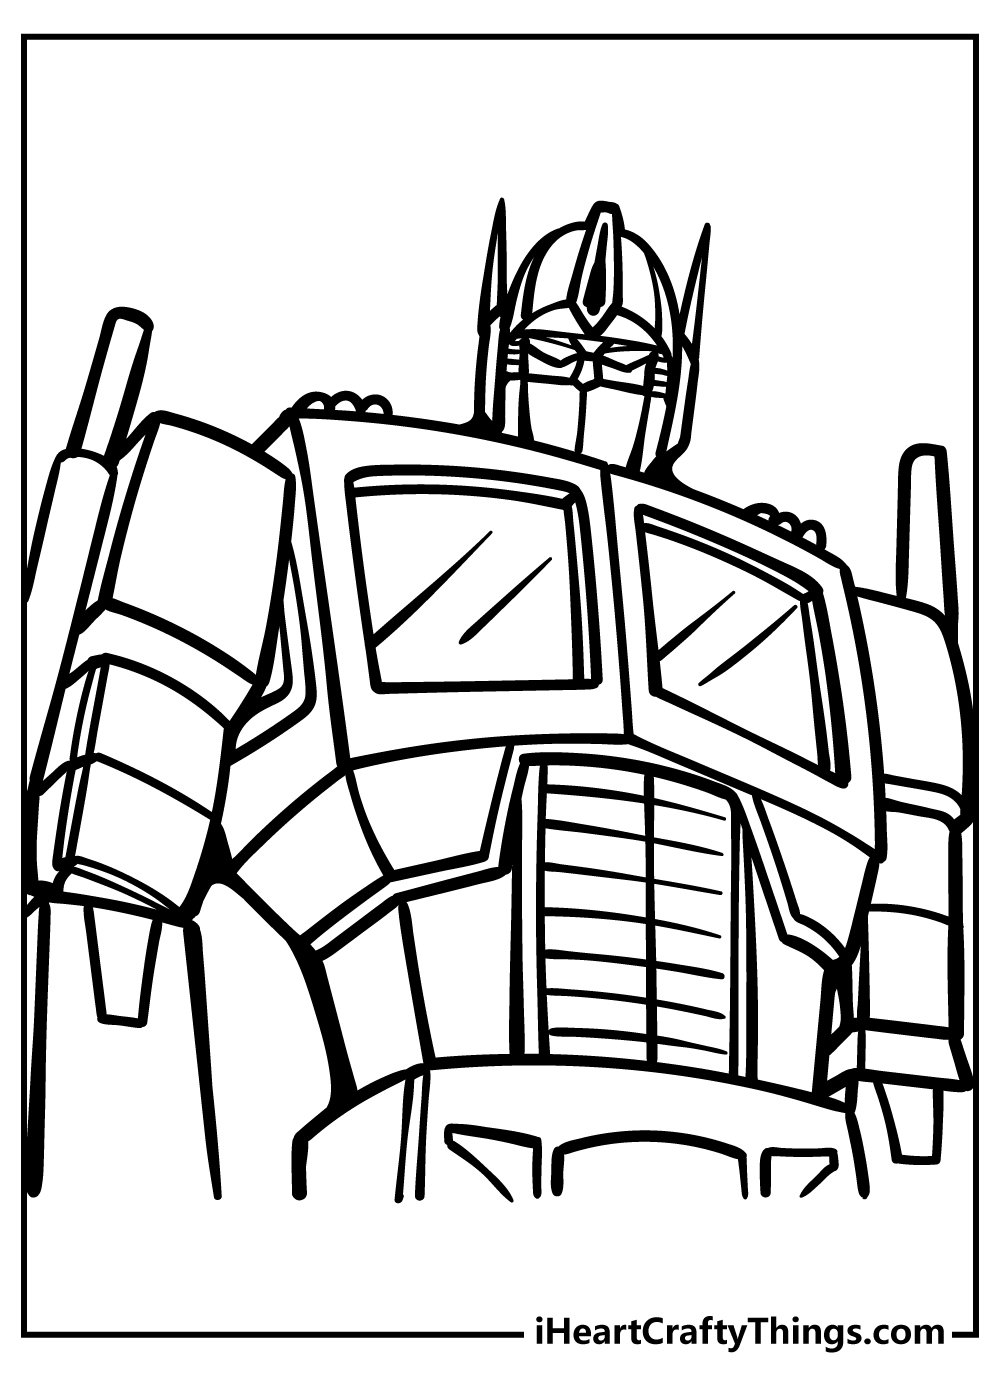 Transformers Coloring Book for adults free download